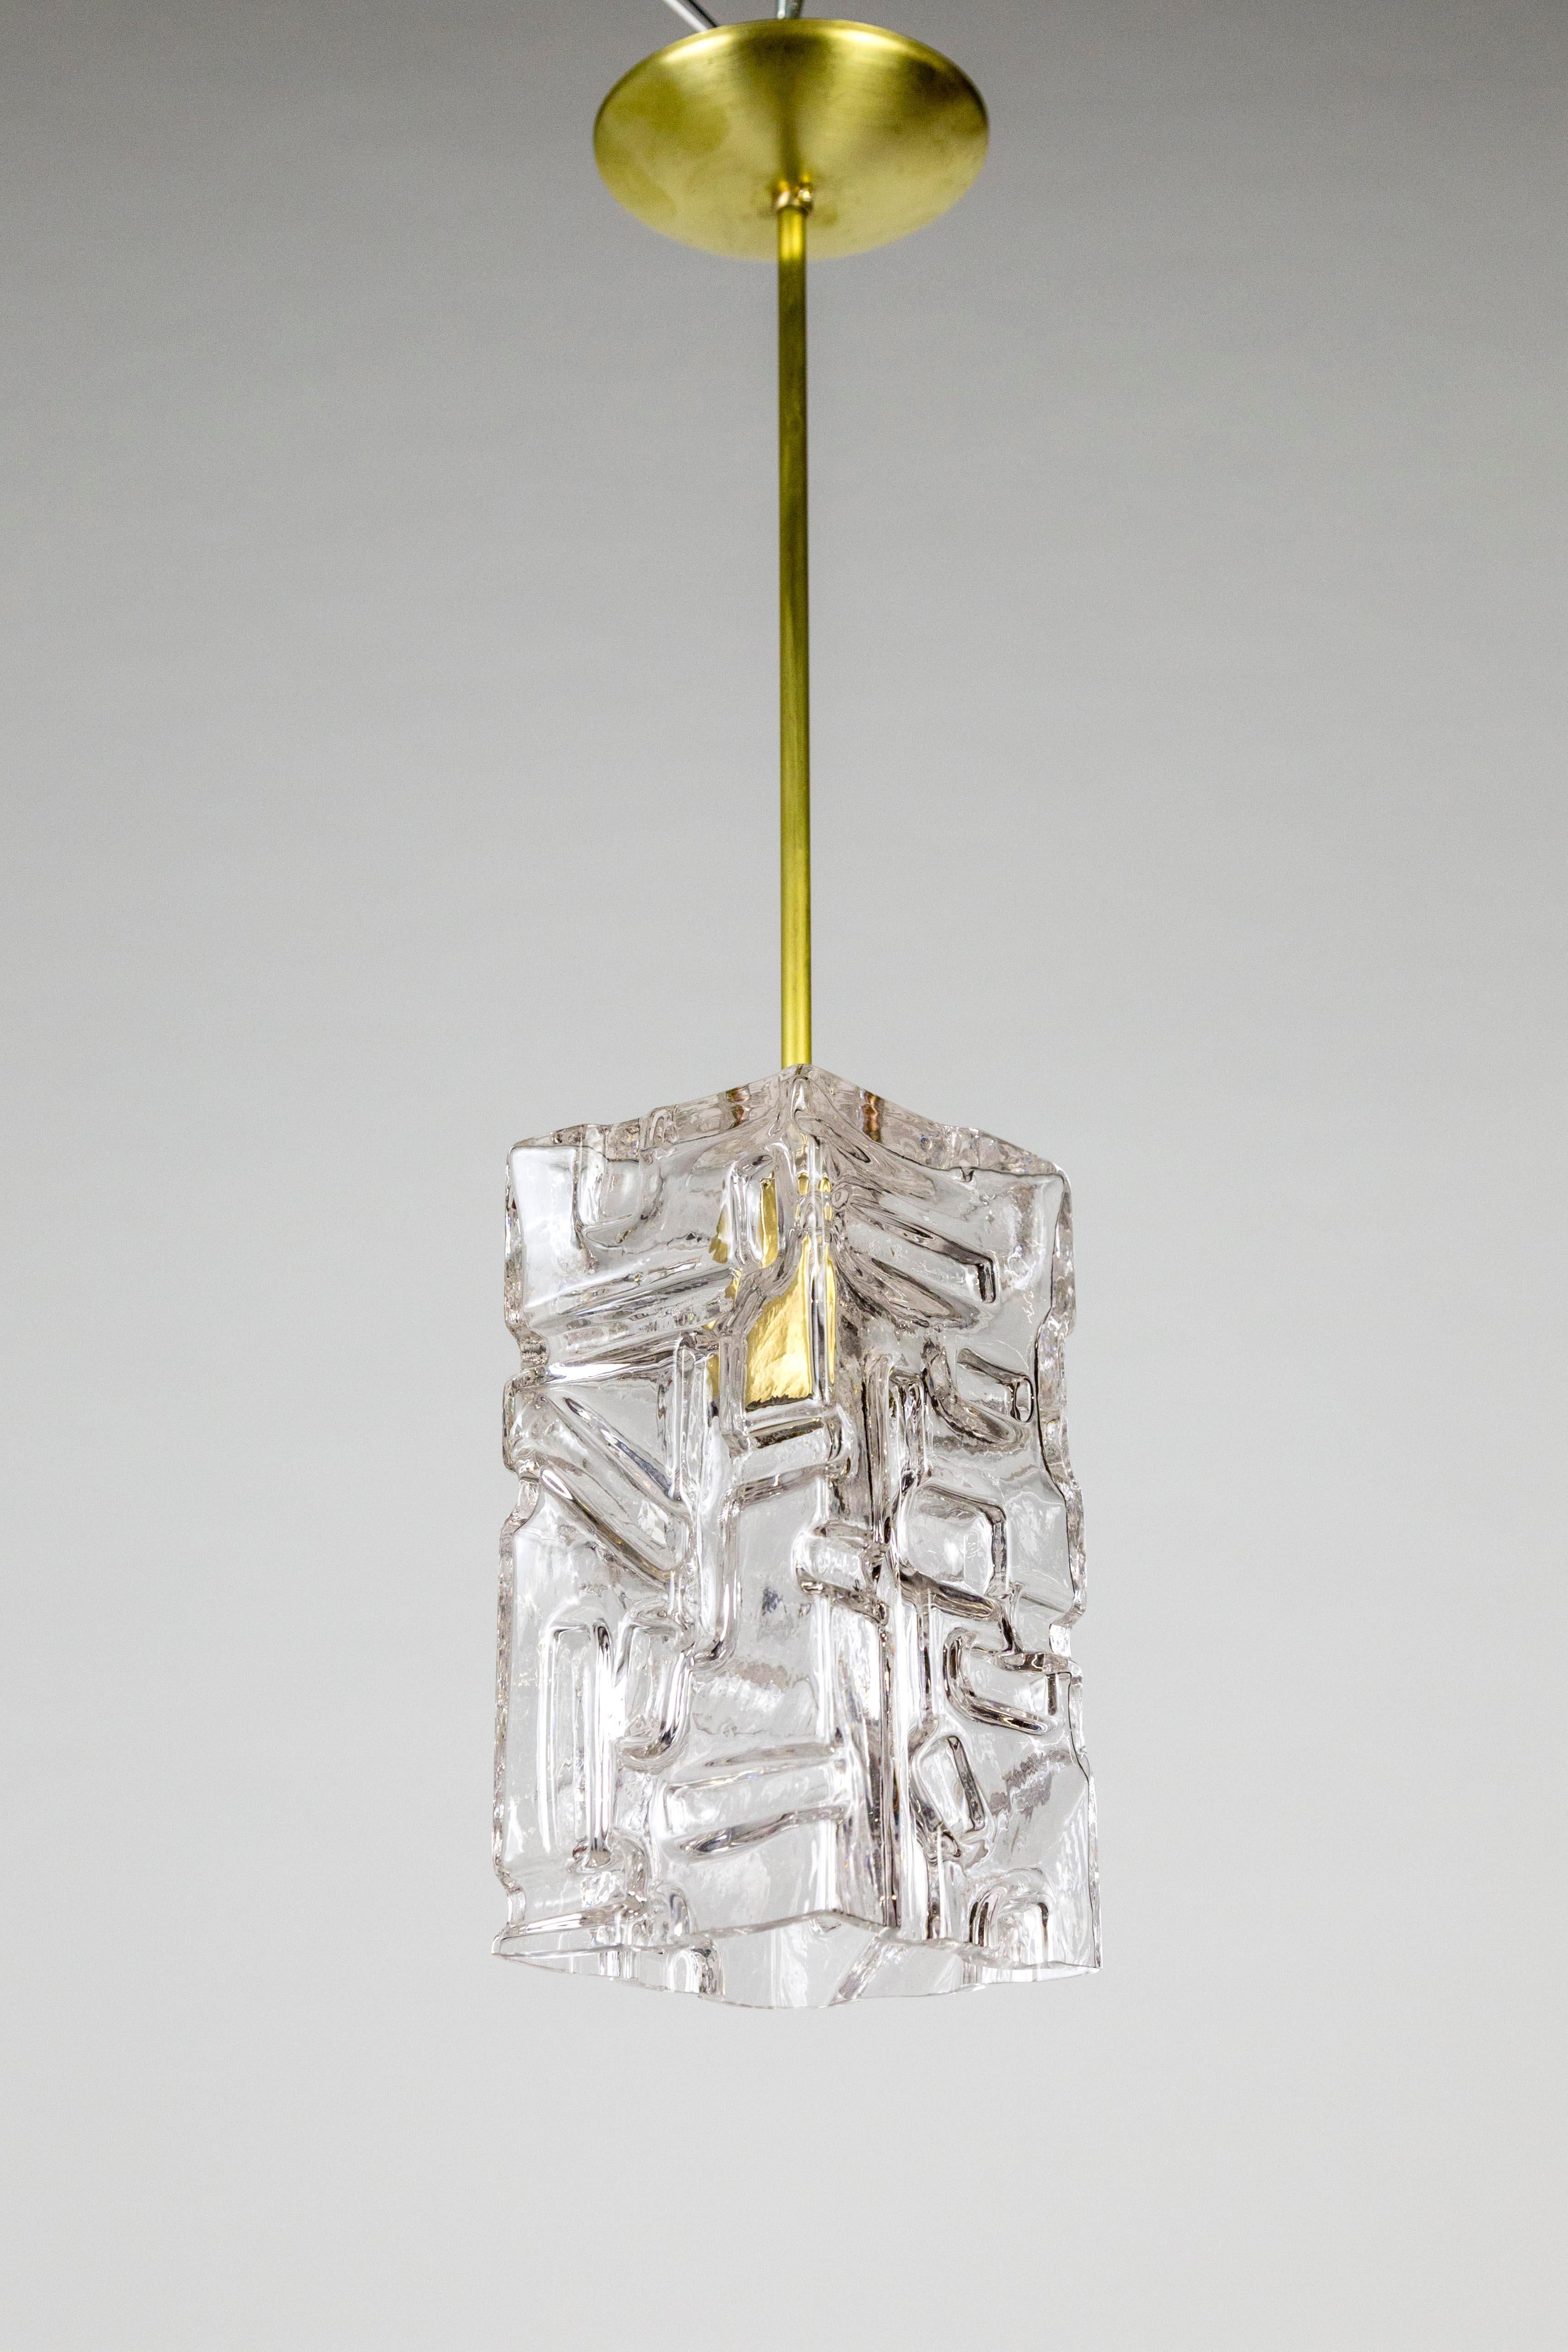 Contemporary Patterned Molded Glass Pendant with Brass Stem '3 Finishes' For Sale 5